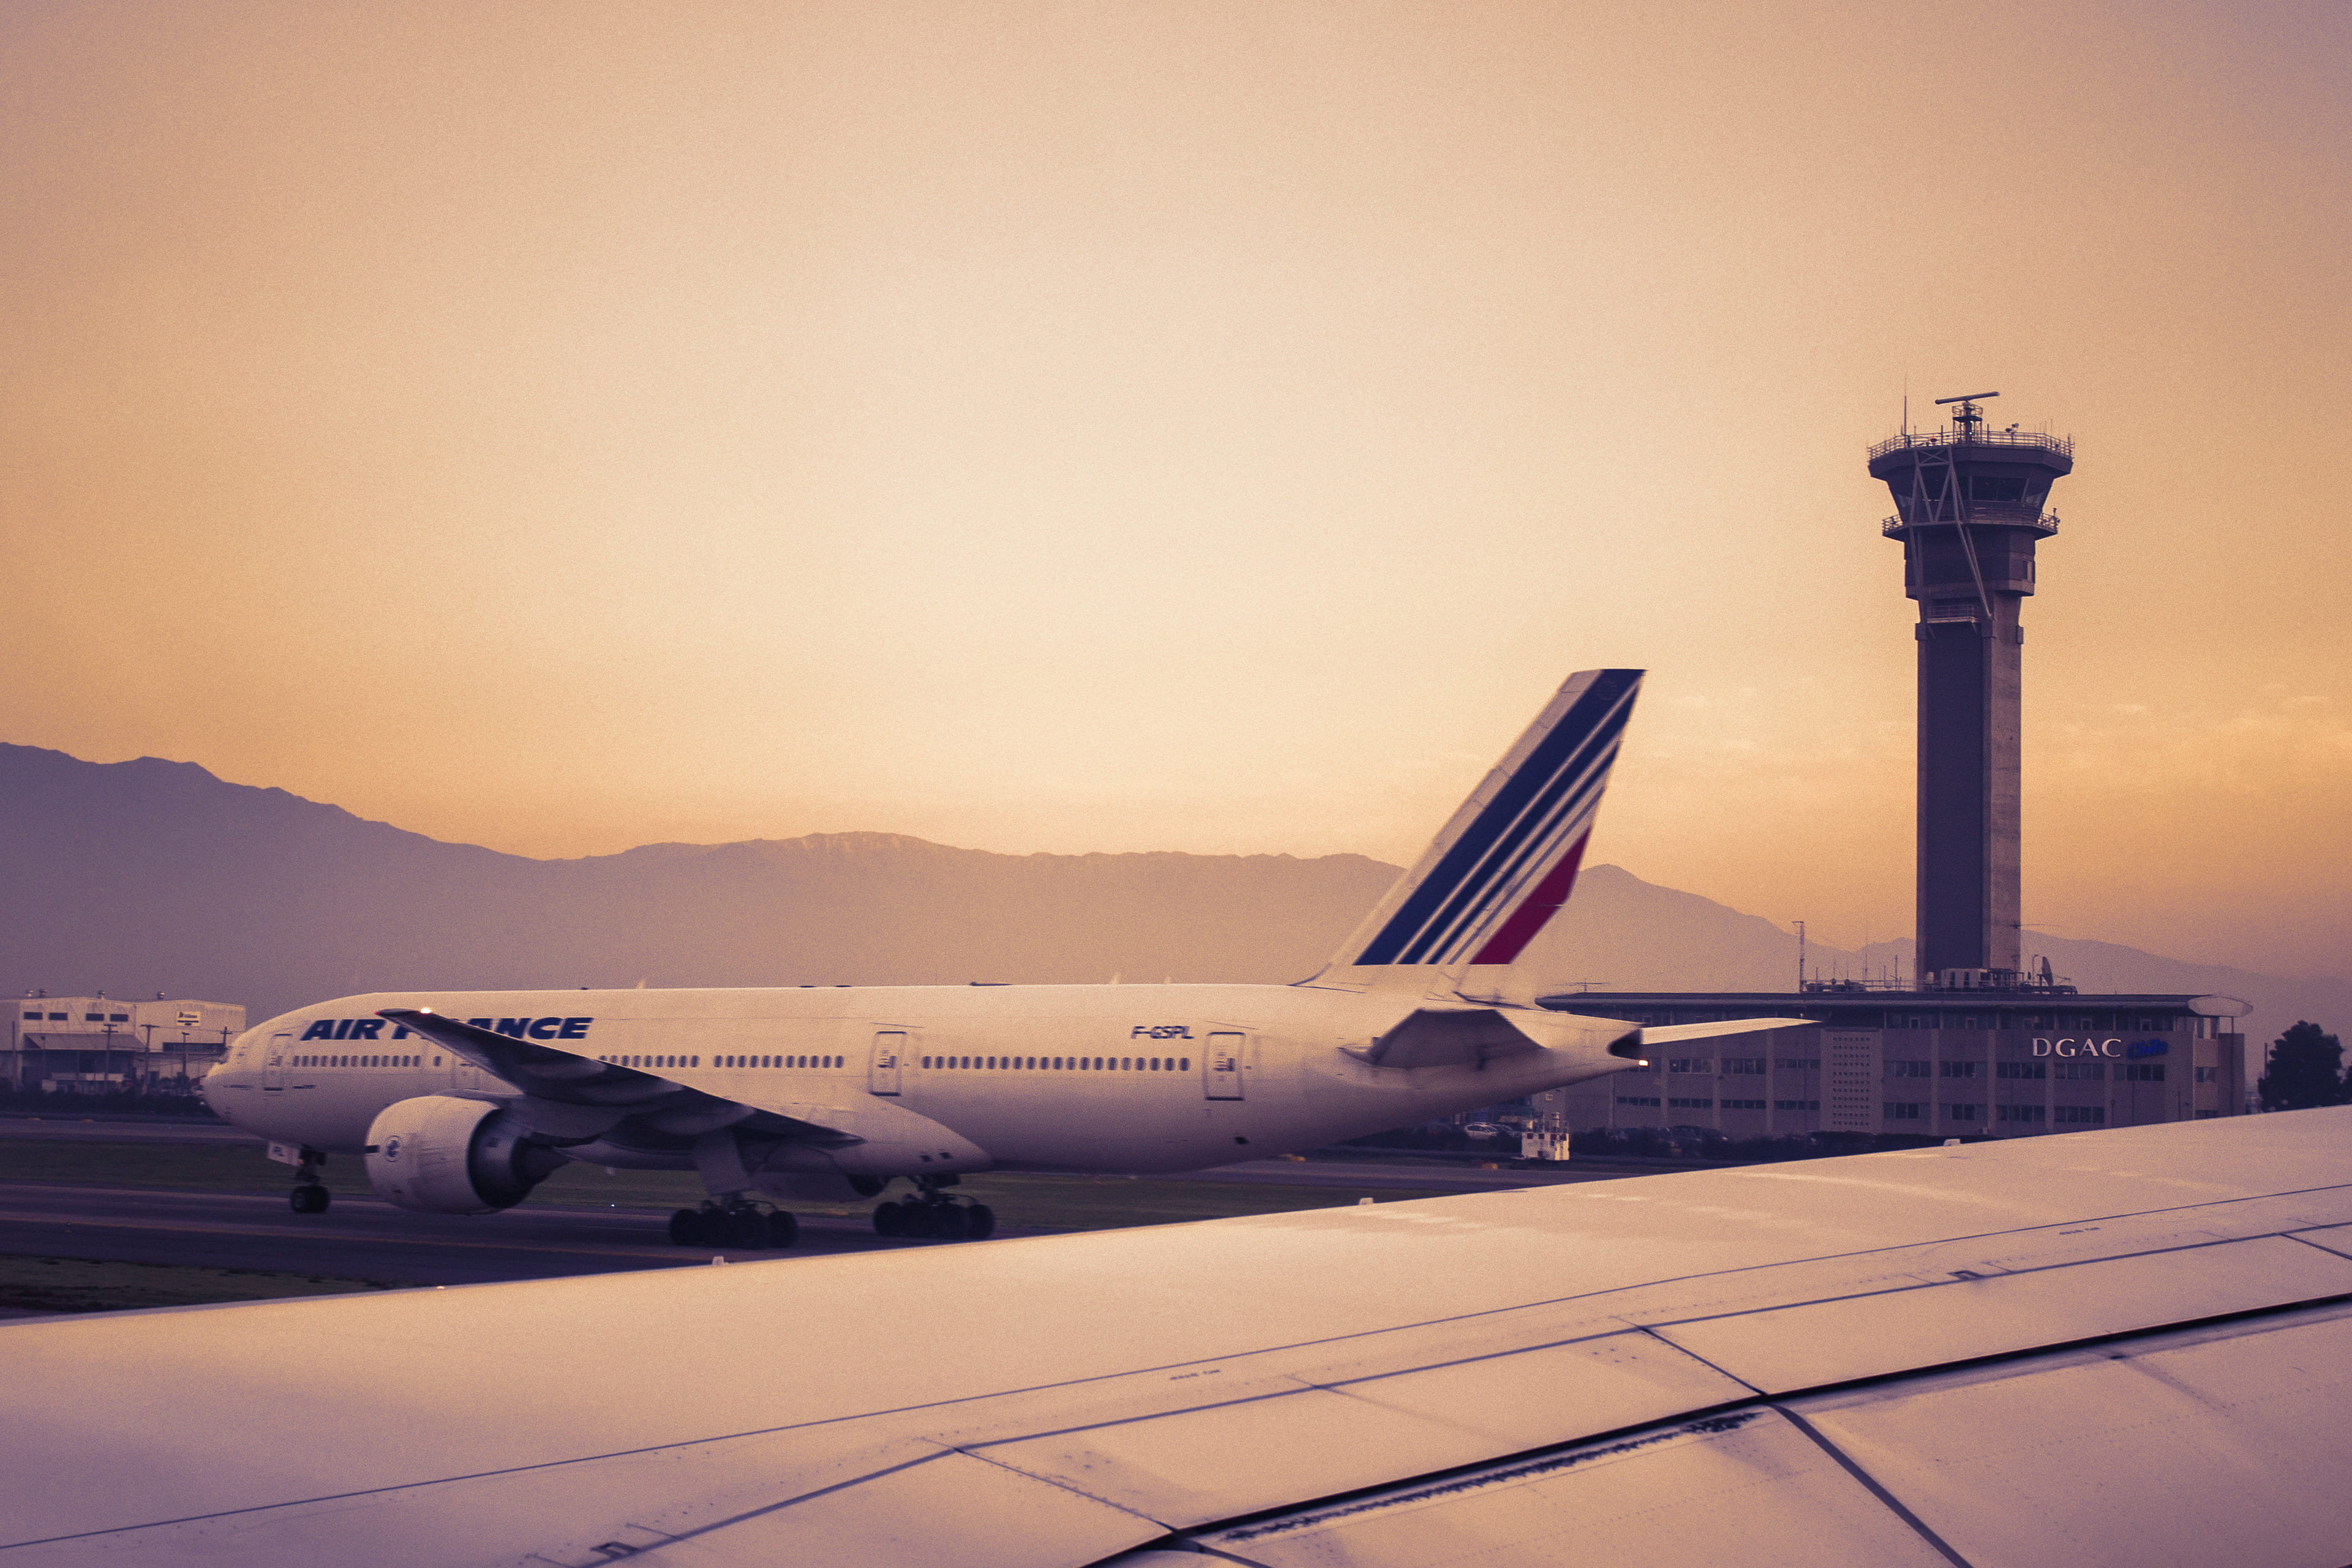 chile, santiago, airfrance, airplane, aeroport, airport, montain